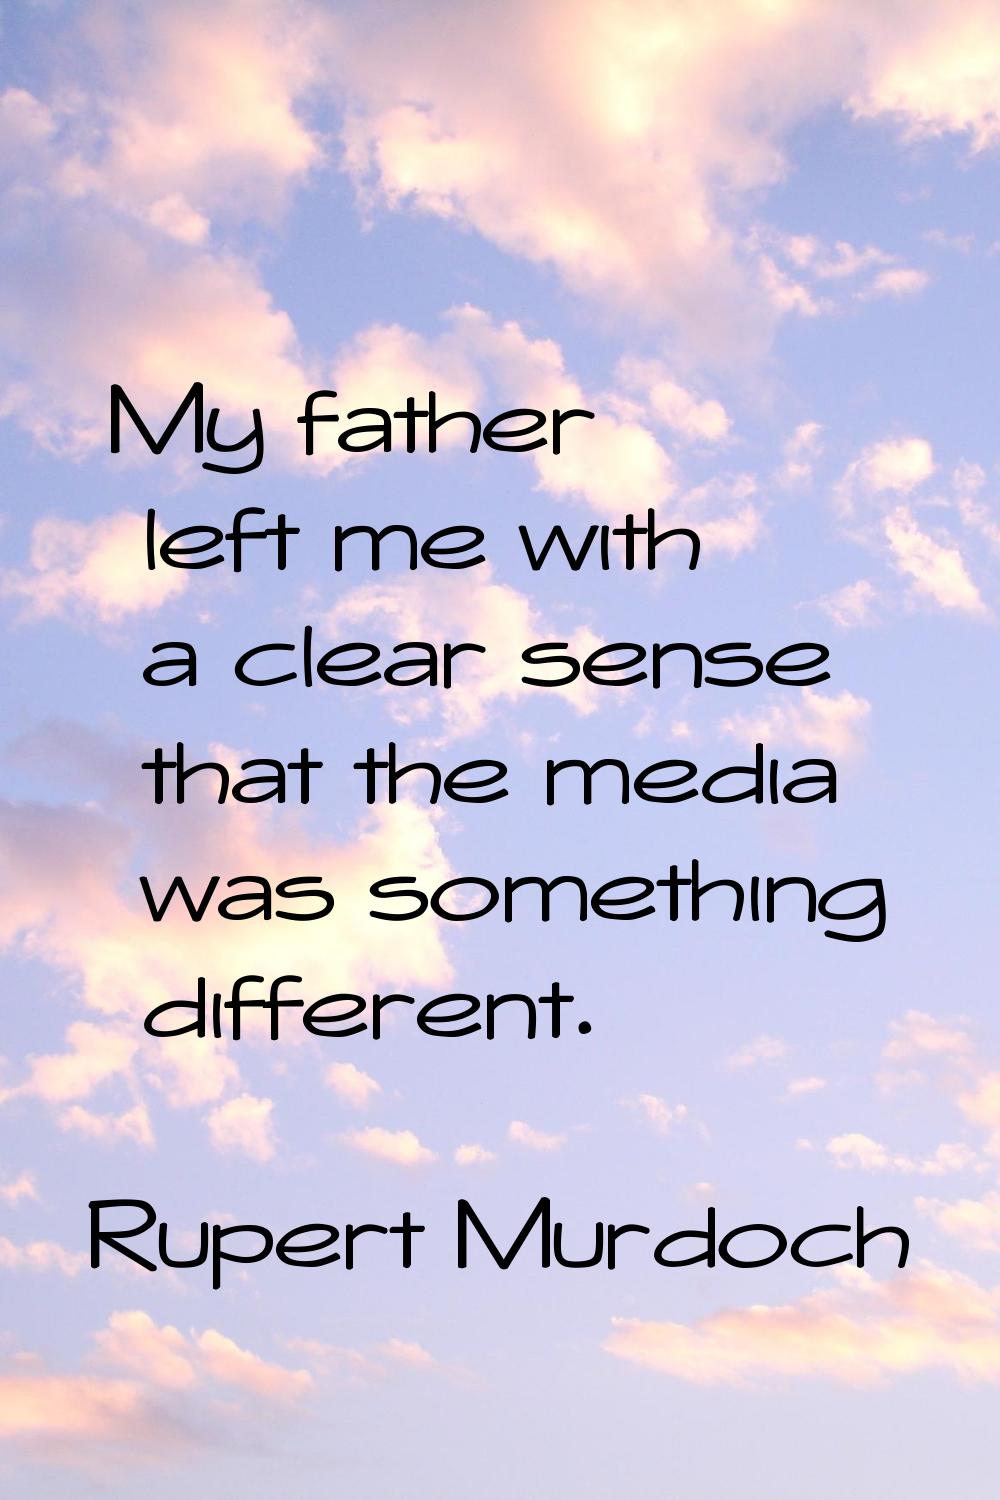 My father left me with a clear sense that the media was something different.